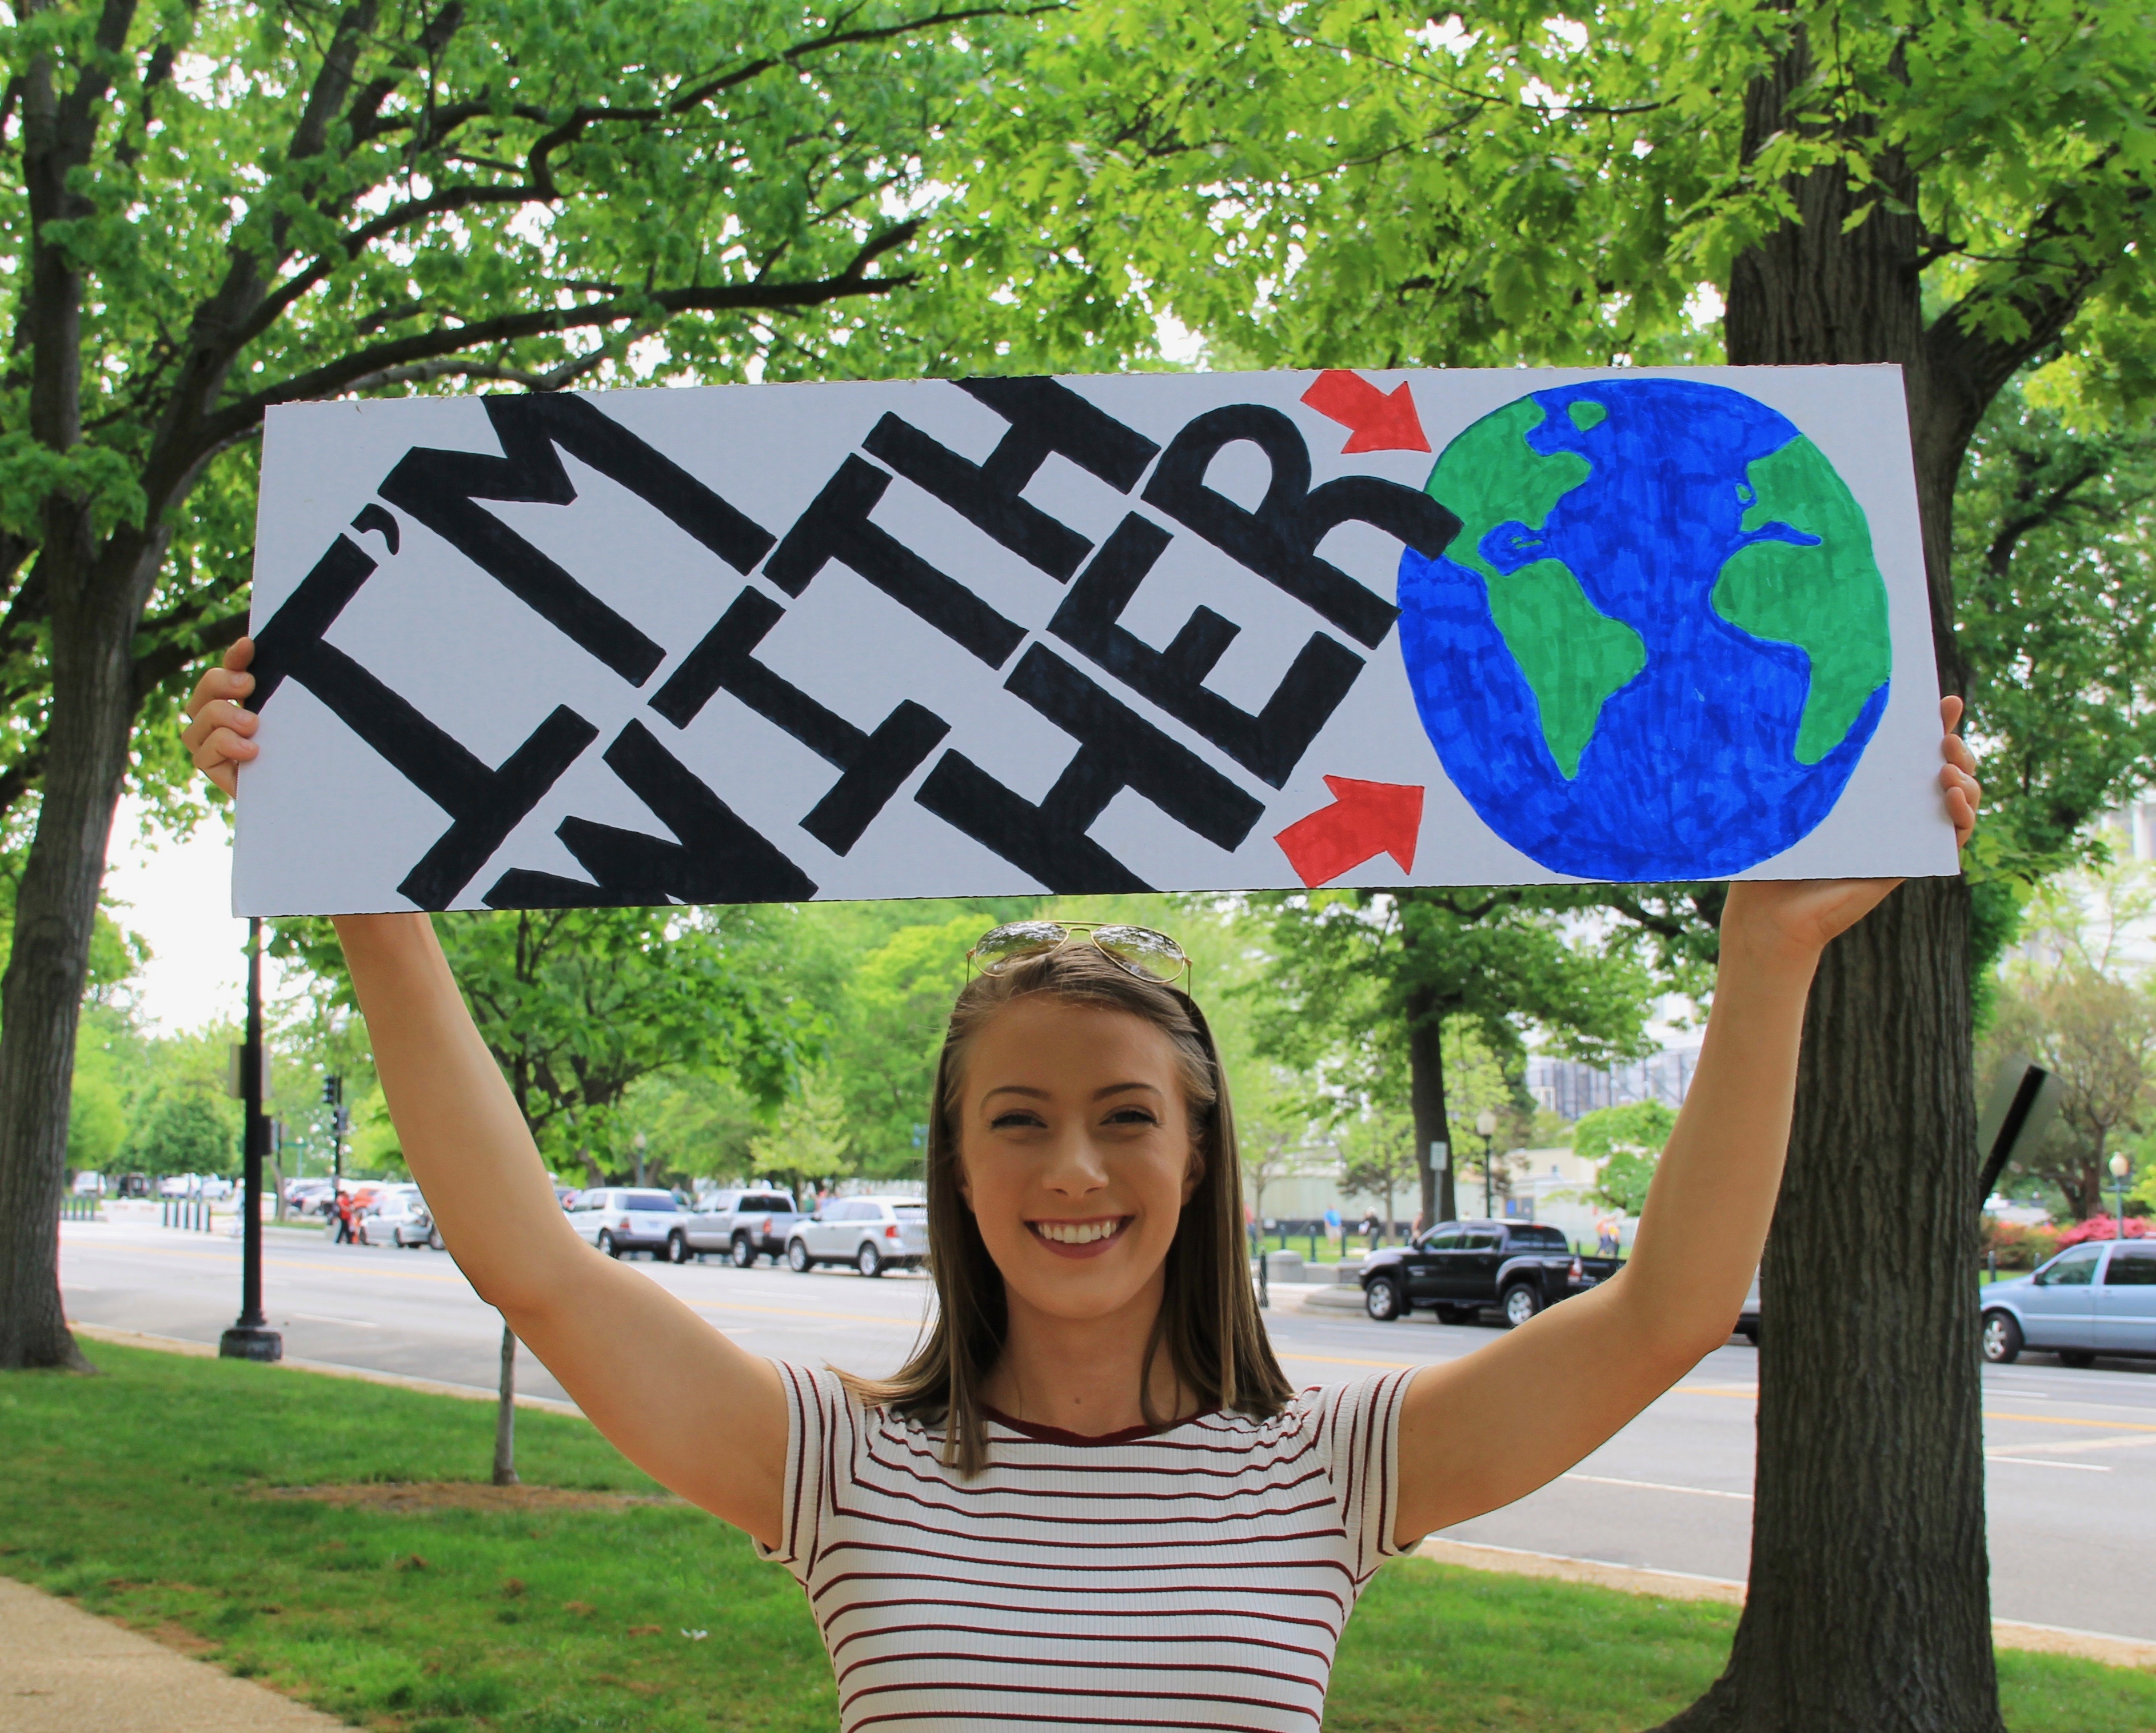 https://upload.wikimedia.org/wikipedia/commons/a/a3/People%27s_Climate_March_2017_in_Washington_DC_39.jpg